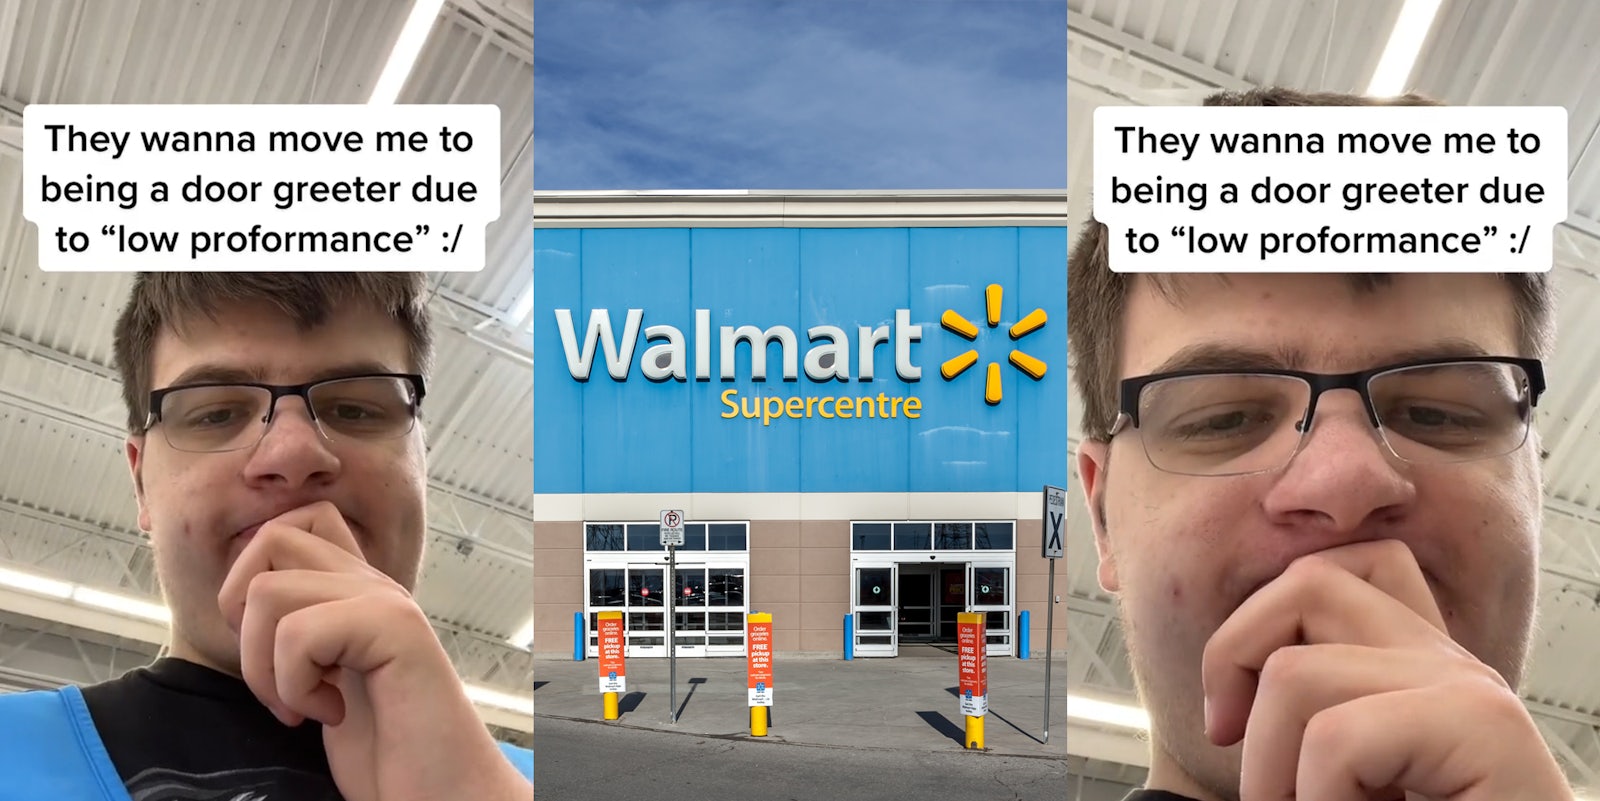 Walmart employee with caption 'They wanna move me to being a door greeter due to 'low performance' :/' (l) Walmart building with sign and storm clouds (c) Walmart employee with caption 'They wanna move me to being a door greeter due to 'low performance' :/' (r)